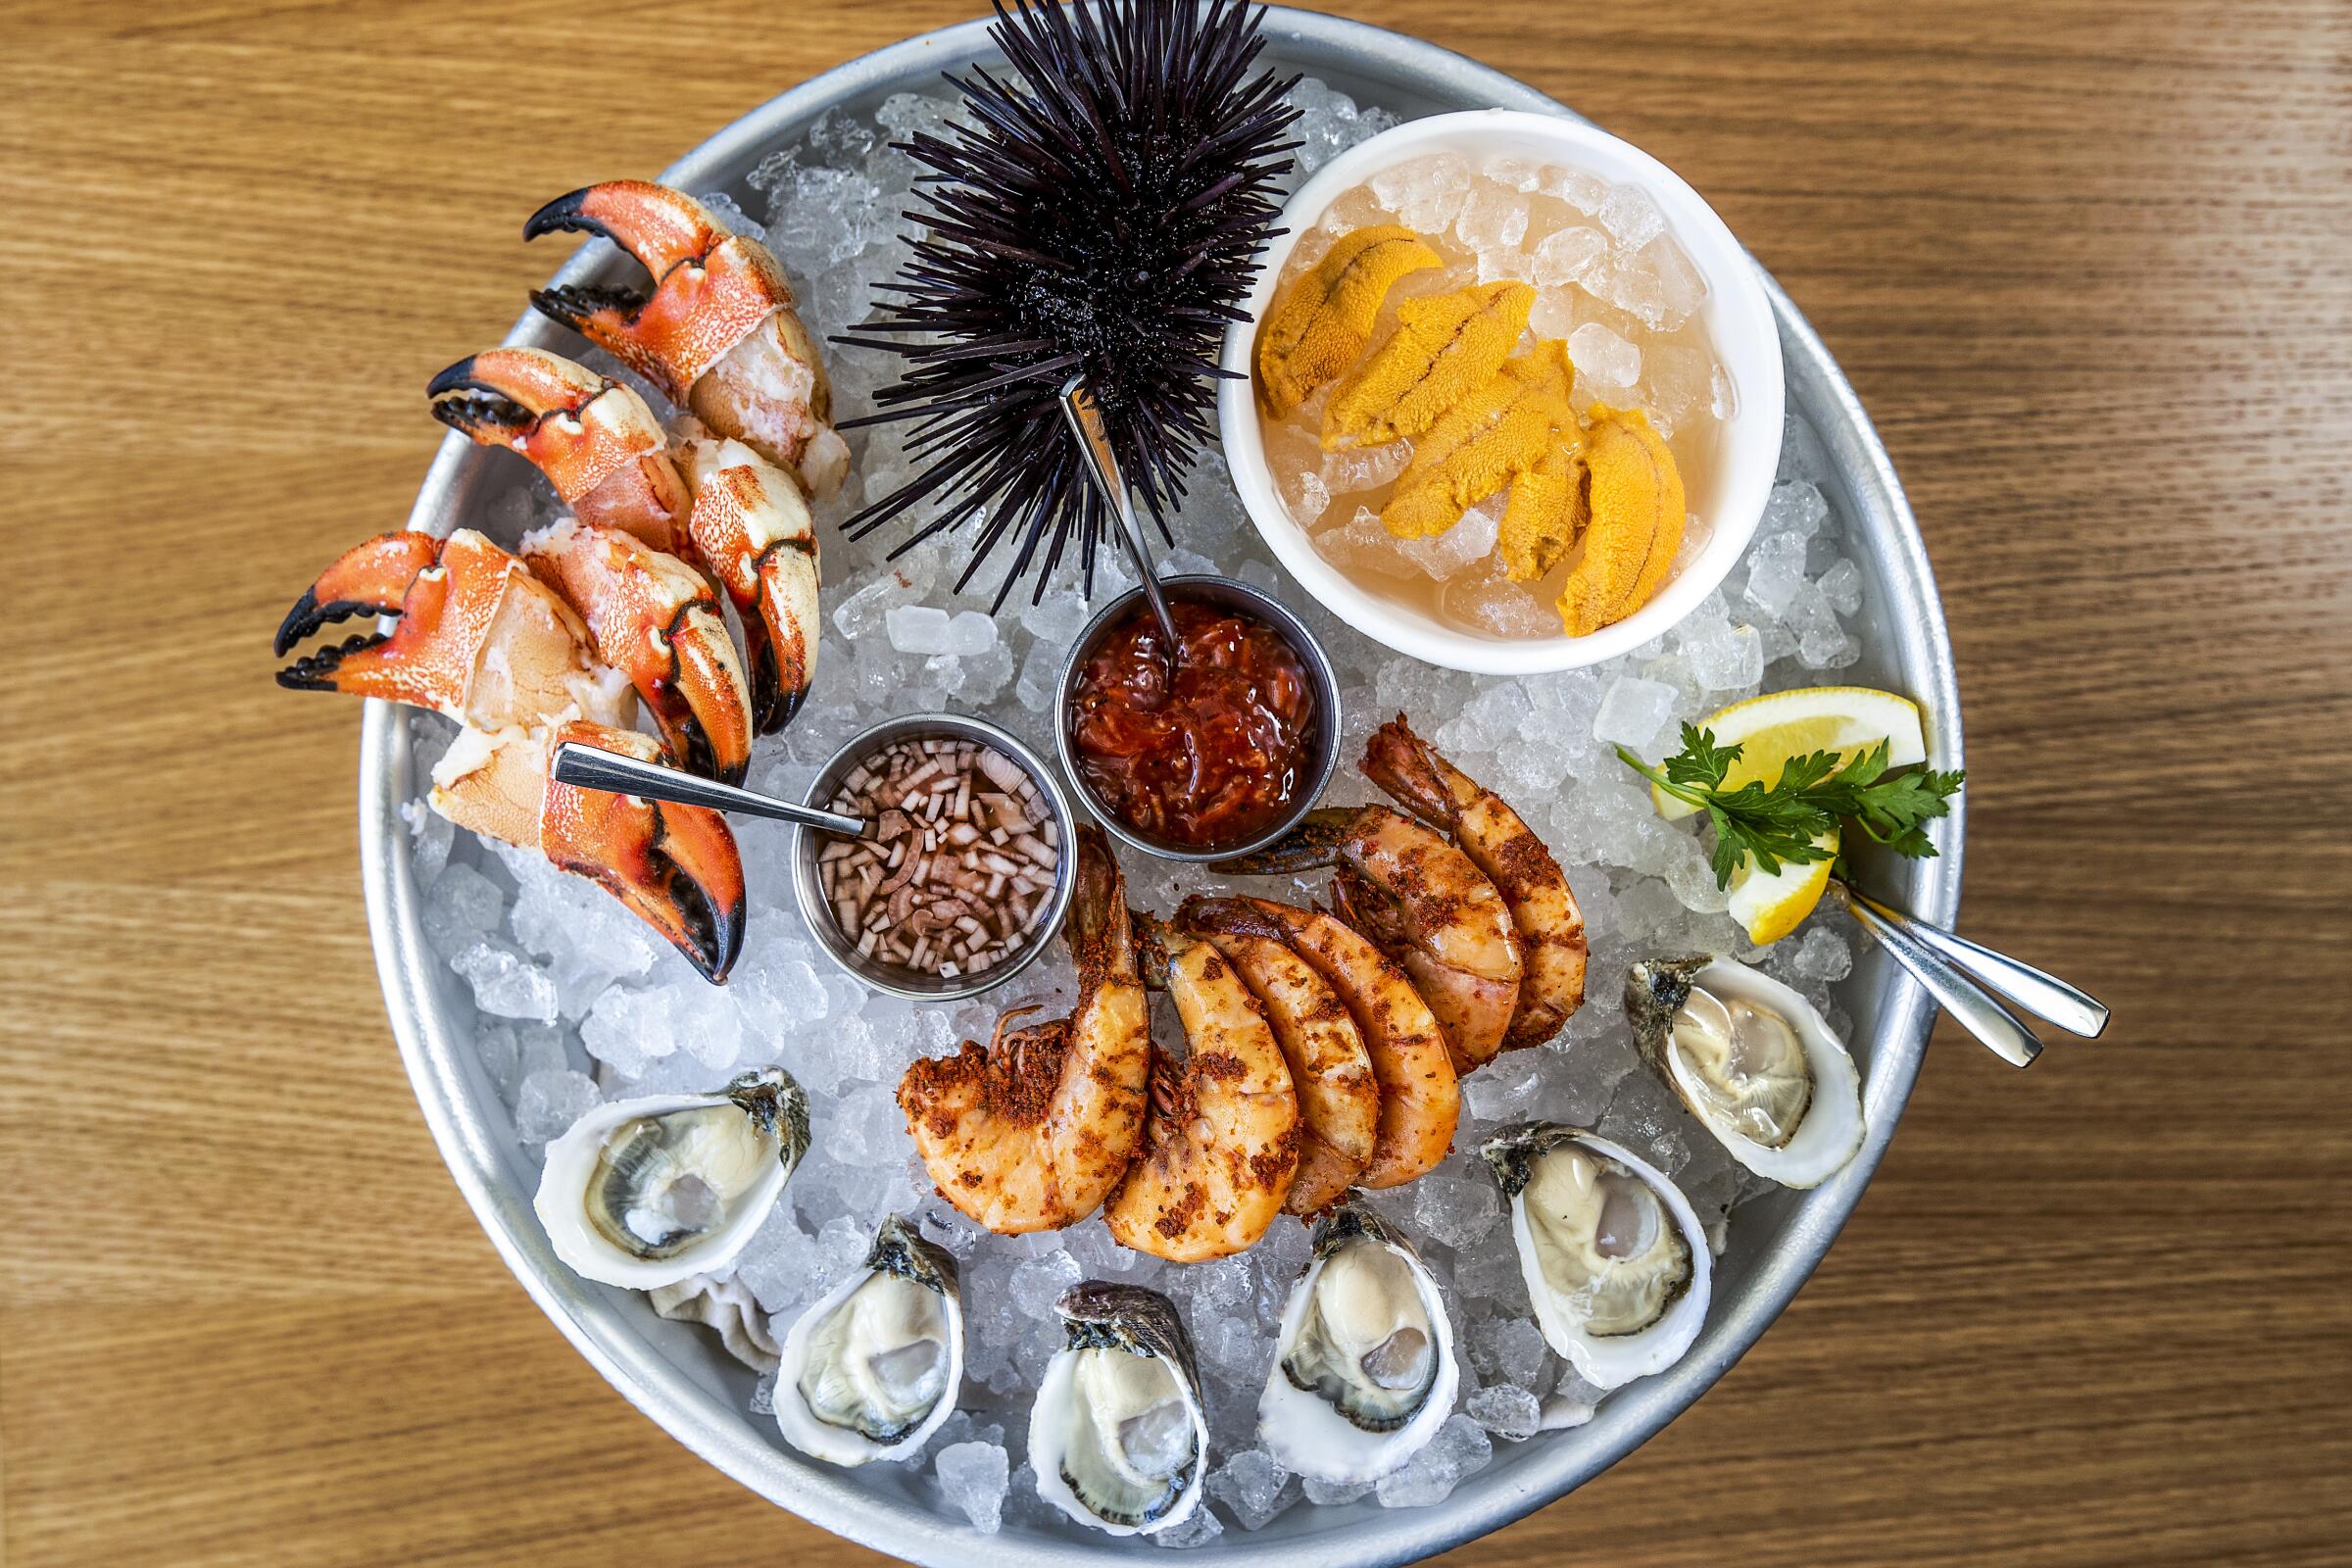 Jonah crab claws, Santa Barbara sea urchin, peel-and-eat shrimp and Pacific Gold Reserves oysters on ice.